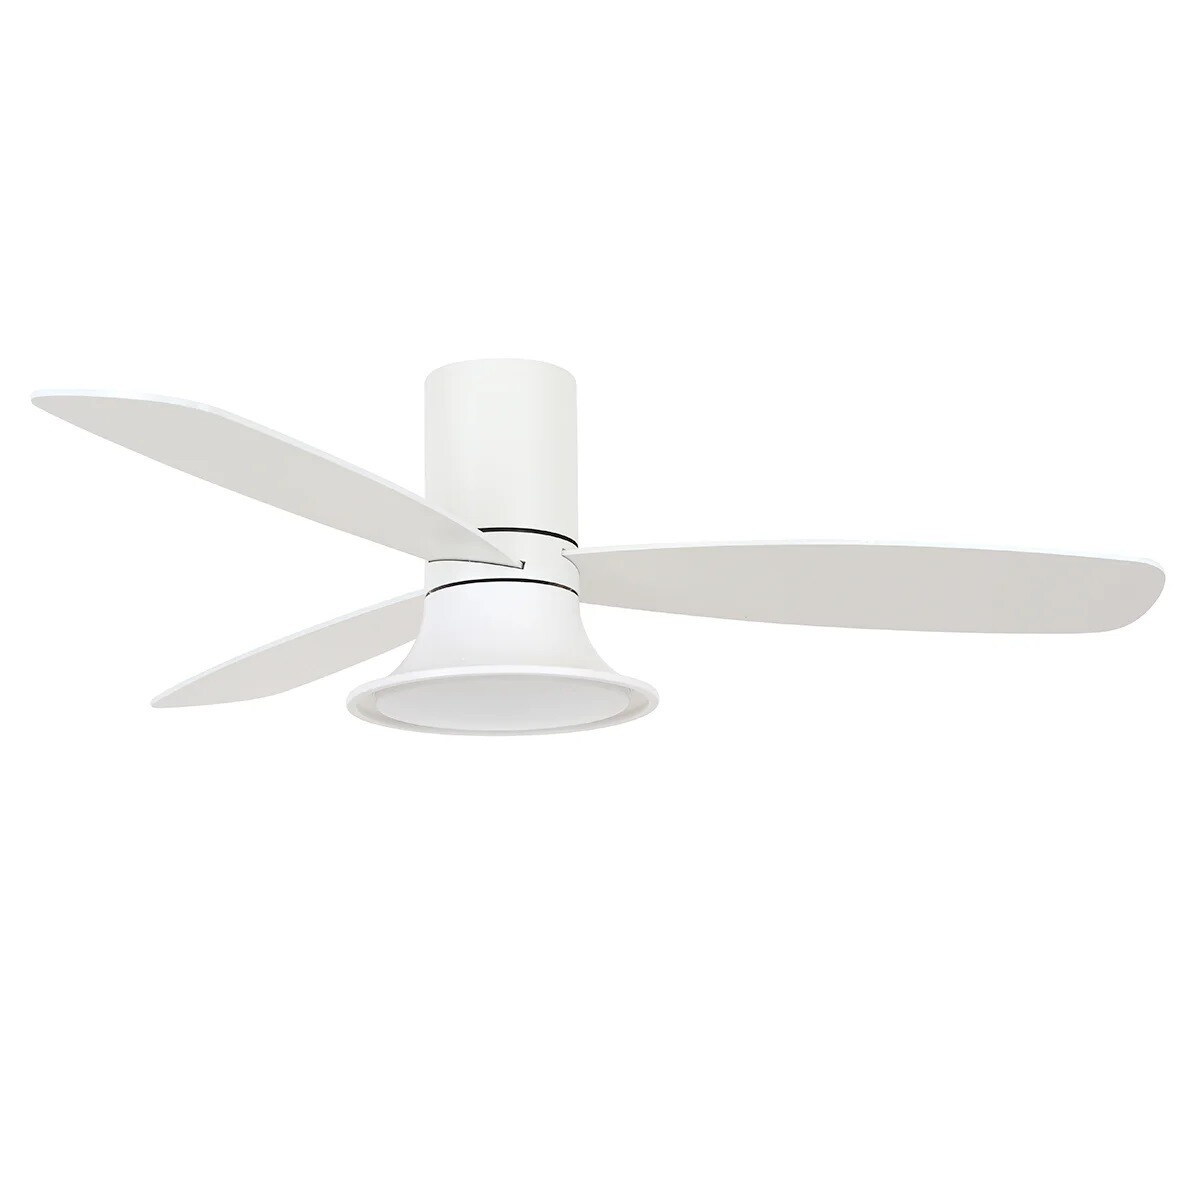 FLUSSO White ceiling fan Ø132cm light integrated and remote control included